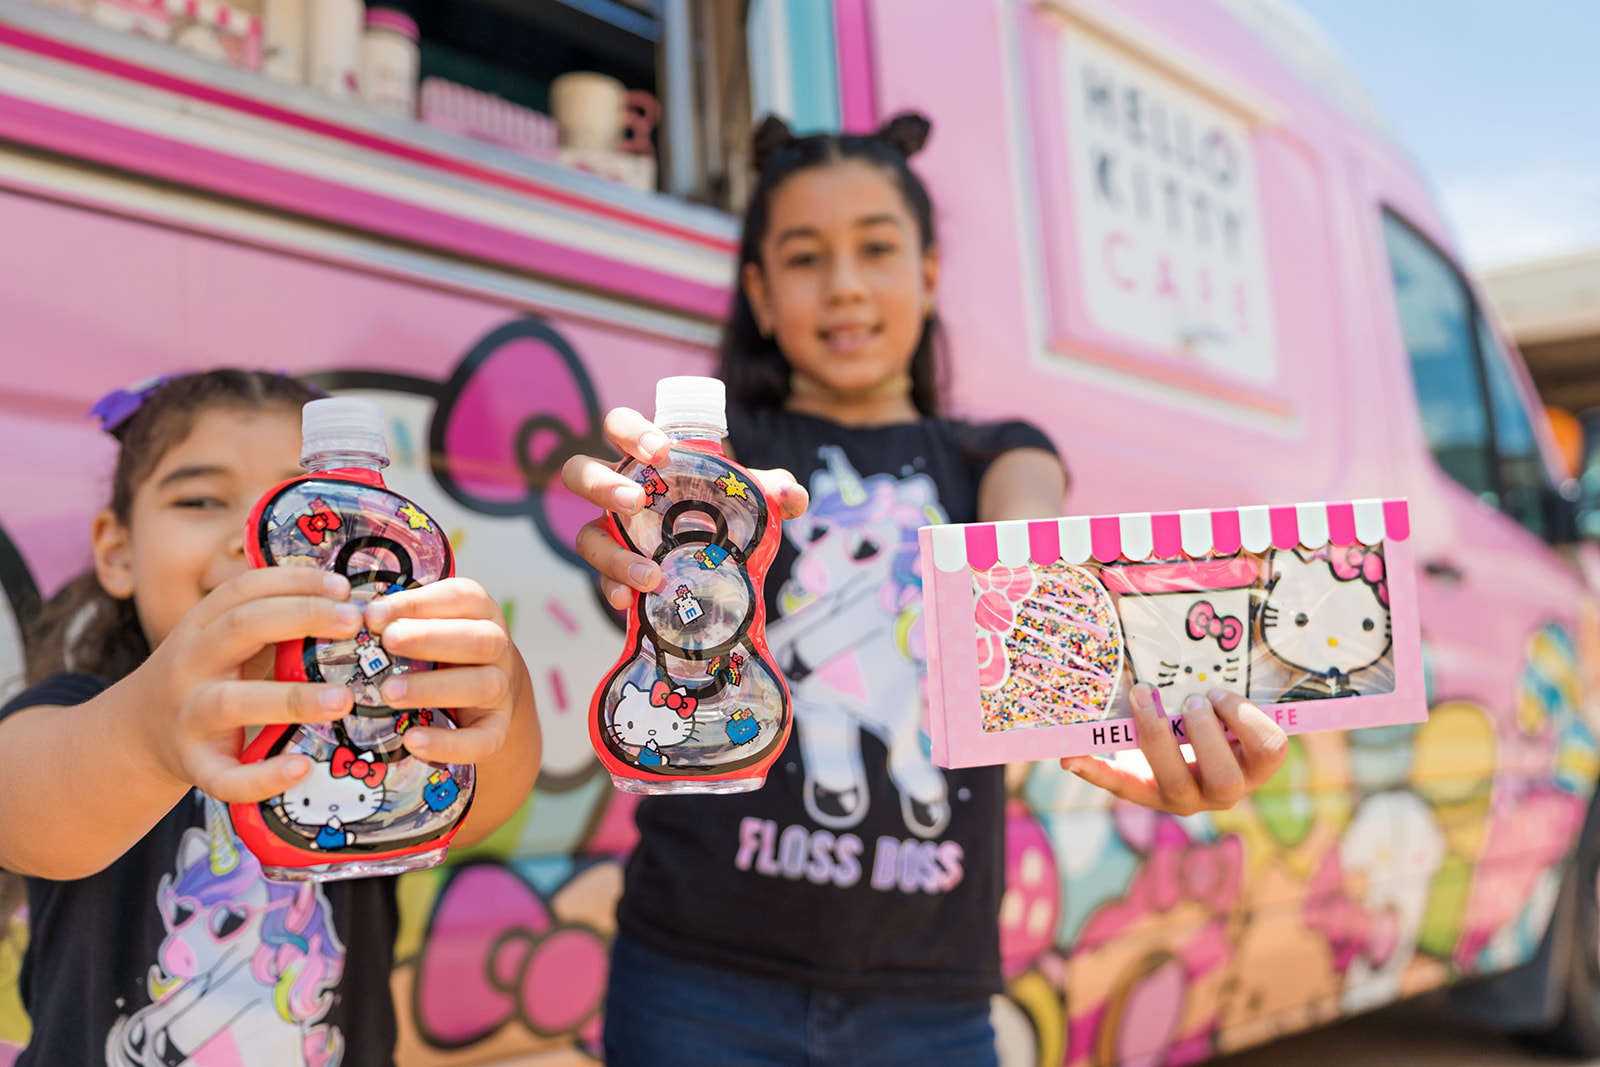 Hello Kitty Cafe truck will be at Florida Mall on Saturday, Oct. 29, Orlando